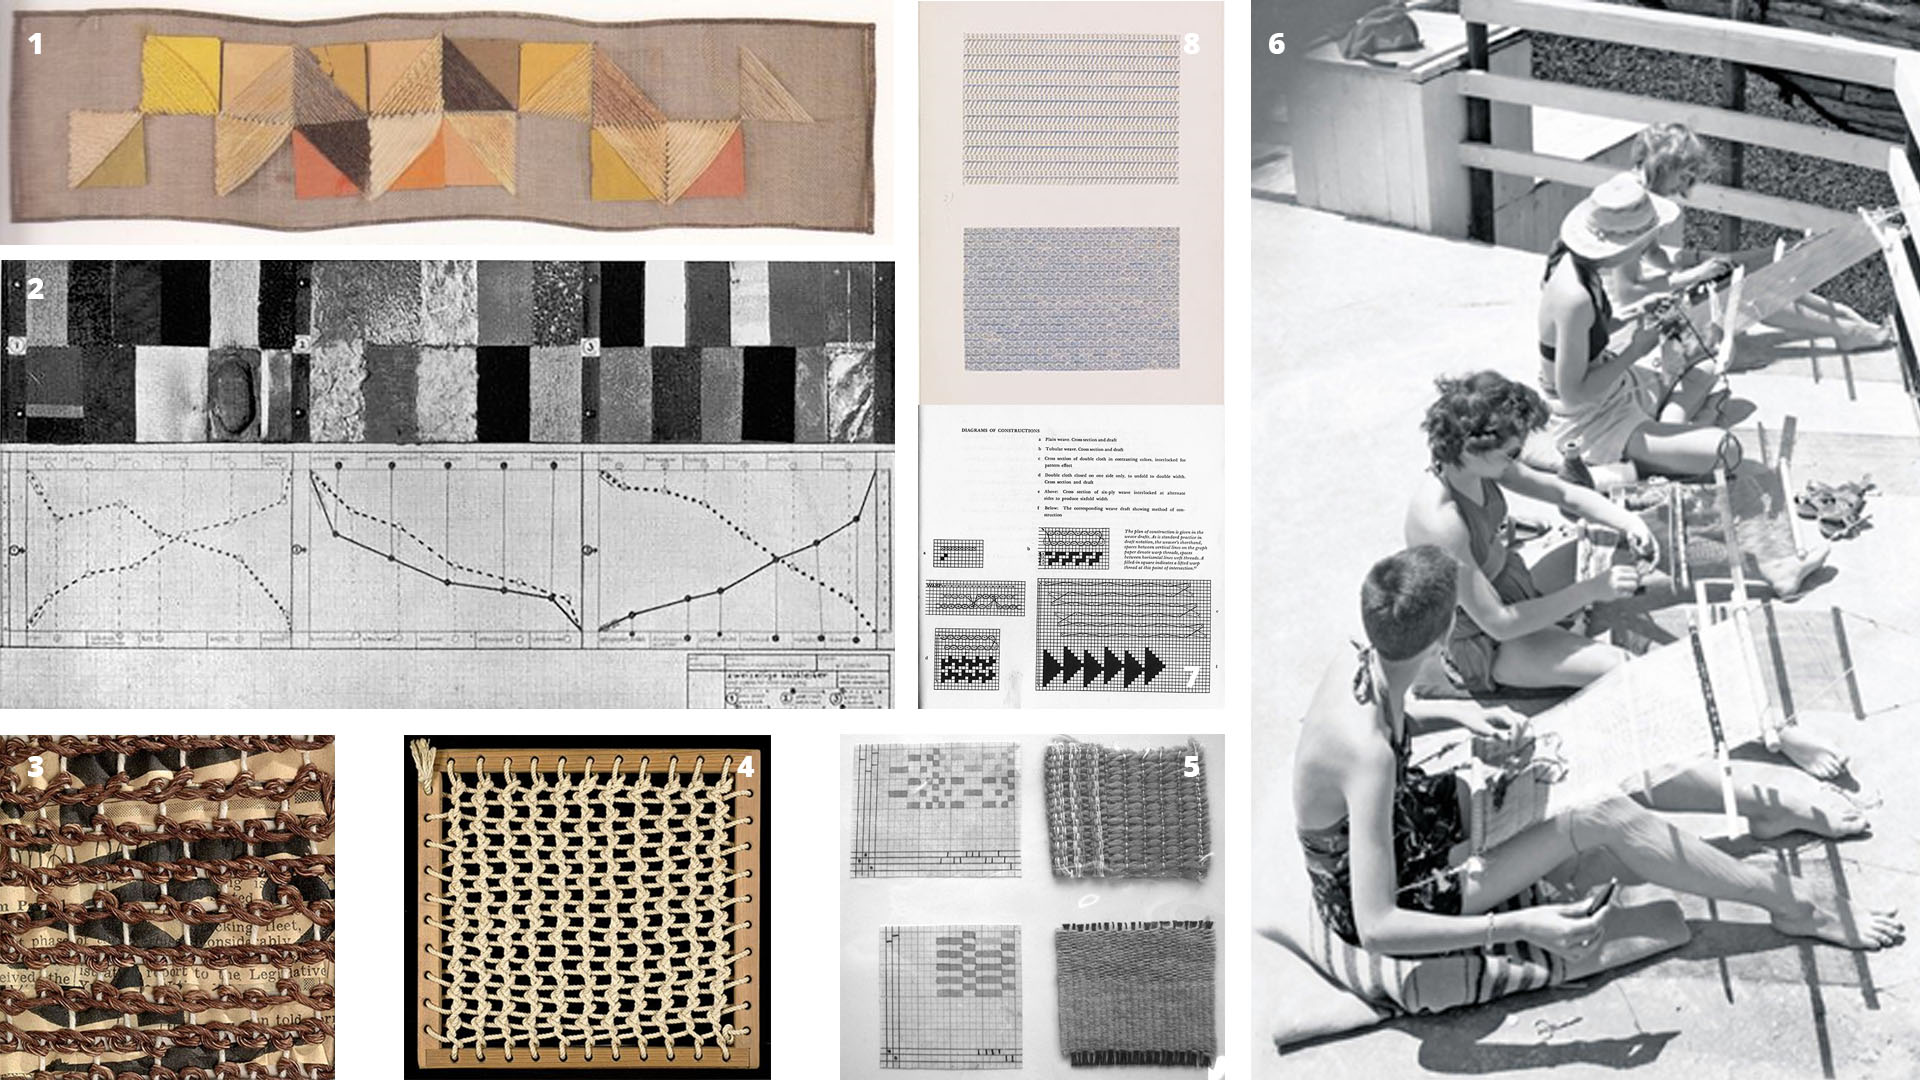 exmples of anni albers' works and teaching